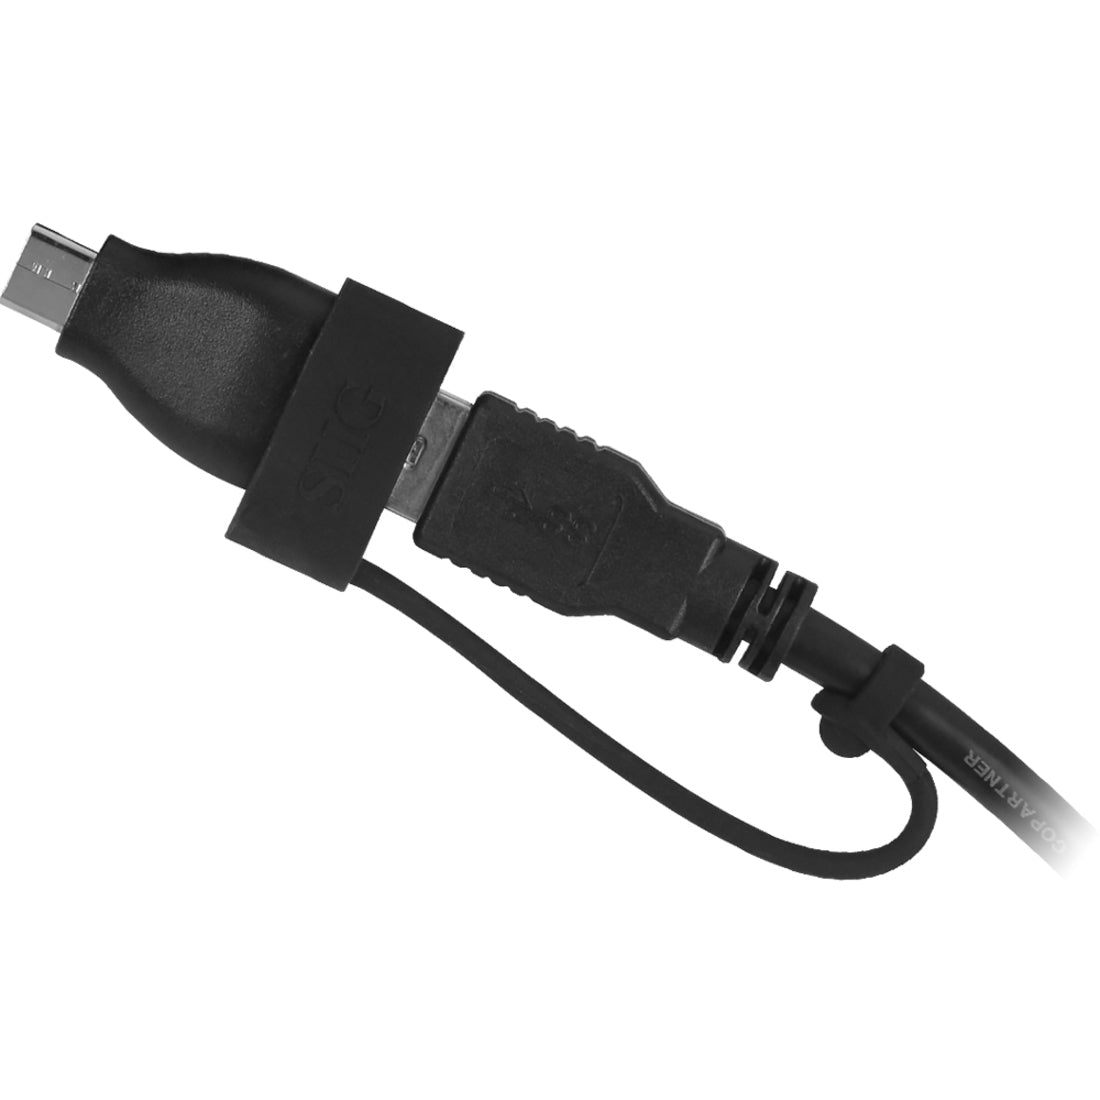 SIIG CB-US0K12-S1 USB 3.1 GEN 1 Type-C to Type-A Adapter - M/F, Premium Quality, Reversible Connection